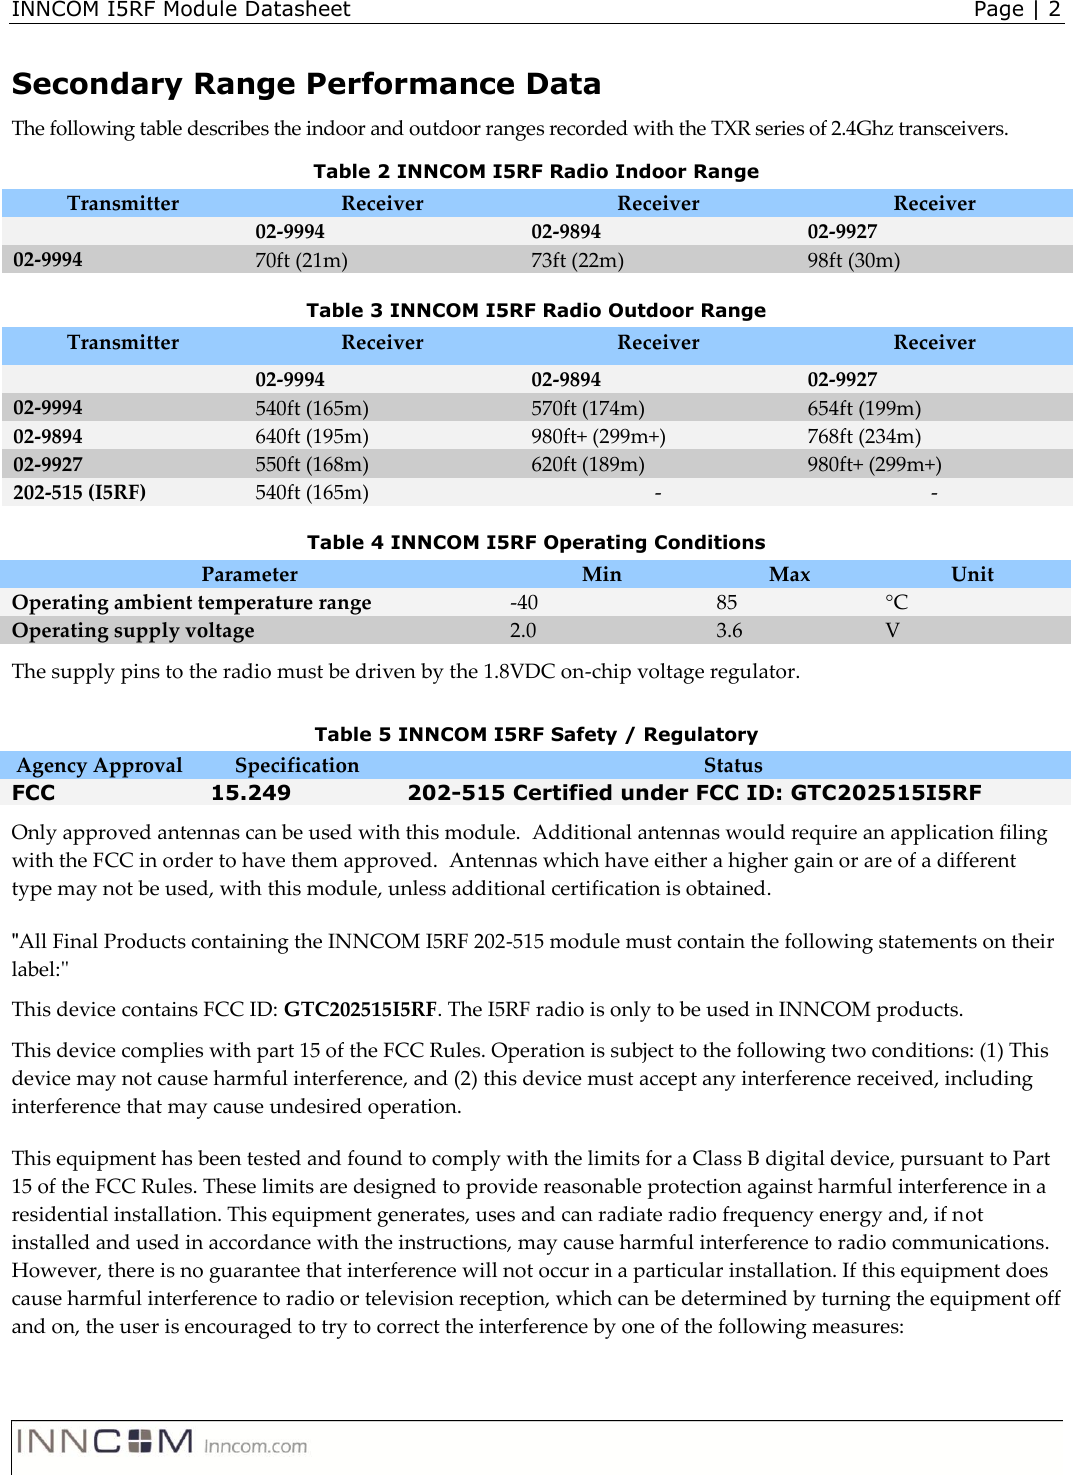 INNCOM I5RF Module Datasheet    Page | 2   Secondary Range Performance Data The following table describes the indoor and outdoor ranges recorded with the TXR series of 2.4Ghz transceivers. Table 2 INNCOM I5RF Radio Indoor Range Transmitter Receiver Receiver Receiver  02-9994 02-9894 02-9927 02-9994 70ft (21m) 73ft (22m) 98ft (30m) Table 3 INNCOM I5RF Radio Outdoor Range Transmitter Receiver Receiver Receiver  02-9994 02-9894 02-9927 02-9994 540ft (165m) 570ft (174m) 654ft (199m) 02-9894 640ft (195m) 980ft+ (299m+) 768ft (234m) 02-9927 550ft (168m) 620ft (189m) 980ft+ (299m+) 202-515 (I5RF) 540ft (165m) - - Table 4 INNCOM I5RF Operating Conditions Parameter Min Max Unit Operating ambient temperature range -40 85 °C Operating supply voltage 2.0 3.6 V The supply pins to the radio must be driven by the 1.8VDC on-chip voltage regulator. Table 5 INNCOM I5RF Safety / Regulatory Agency Approval Specification Status FCC 15.249 202-515 Certified under FCC ID: GTC202515I5RF Only approved antennas can be used with this module.  Additional antennas would require an application filing with the FCC in order to have them approved.  Antennas which have either a higher gain or are of a different type may not be used, with this module, unless additional certification is obtained. &quot;All Final Products containing the INNCOM I5RF 202-515 module must contain the following statements on their label:&quot;   This device contains FCC ID: GTC202515I5RF. The I5RF radio is only to be used in INNCOM products. This device complies with part 15 of the FCC Rules. Operation is subject to the following two conditions: (1) This device may not cause harmful interference, and (2) this device must accept any interference received, including interference that may cause undesired operation. This equipment has been tested and found to comply with the limits for a Class B digital device, pursuant to Part 15 of the FCC Rules. These limits are designed to provide reasonable protection against harmful interference in a residential installation. This equipment generates, uses and can radiate radio frequency energy and, if not installed and used in accordance with the instructions, may cause harmful interference to radio communications. However, there is no guarantee that interference will not occur in a particular installation. If this equipment does cause harmful interference to radio or television reception, which can be determined by turning the equipment off and on, the user is encouraged to try to correct the interference by one of the following measures:  